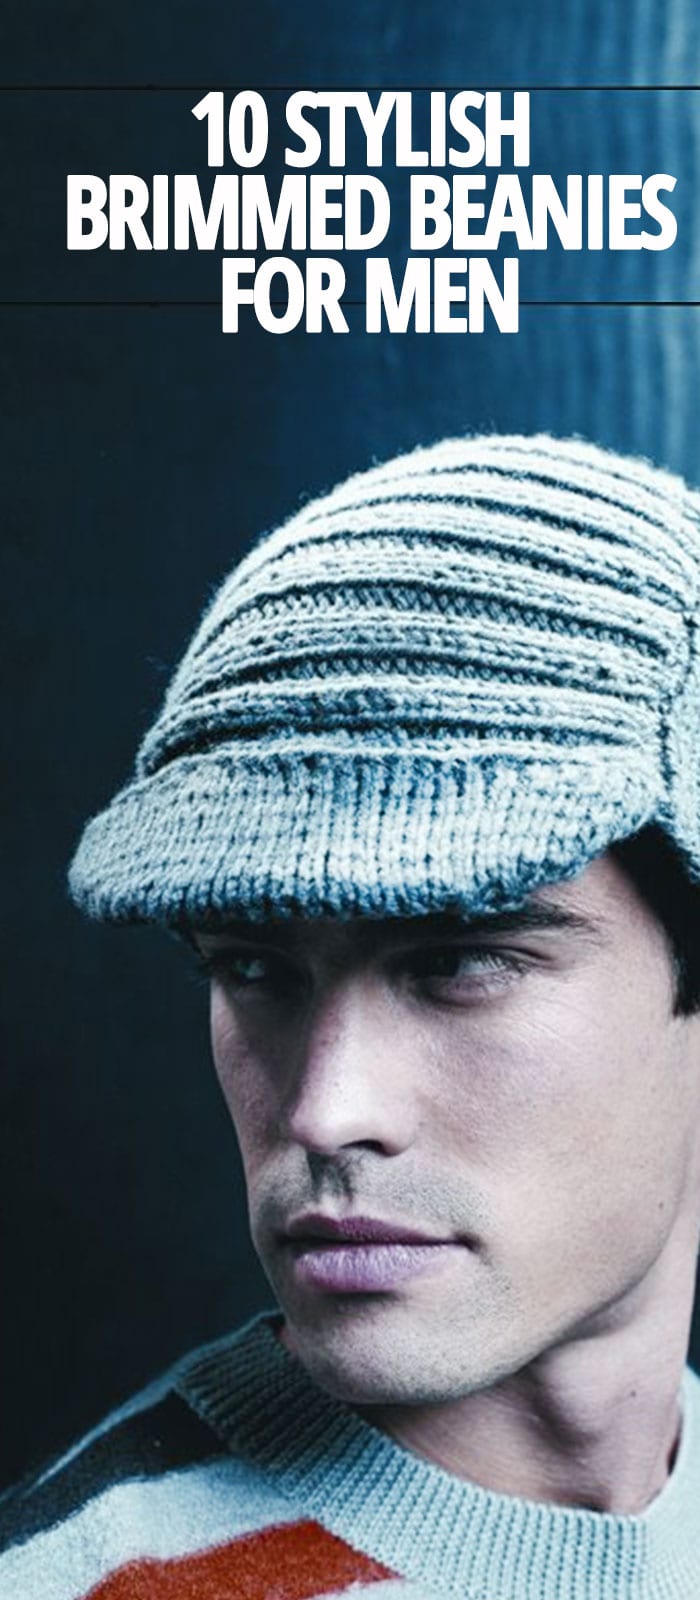 10-STYLISH-BRIMMED-BEANIES-FOR-MEN